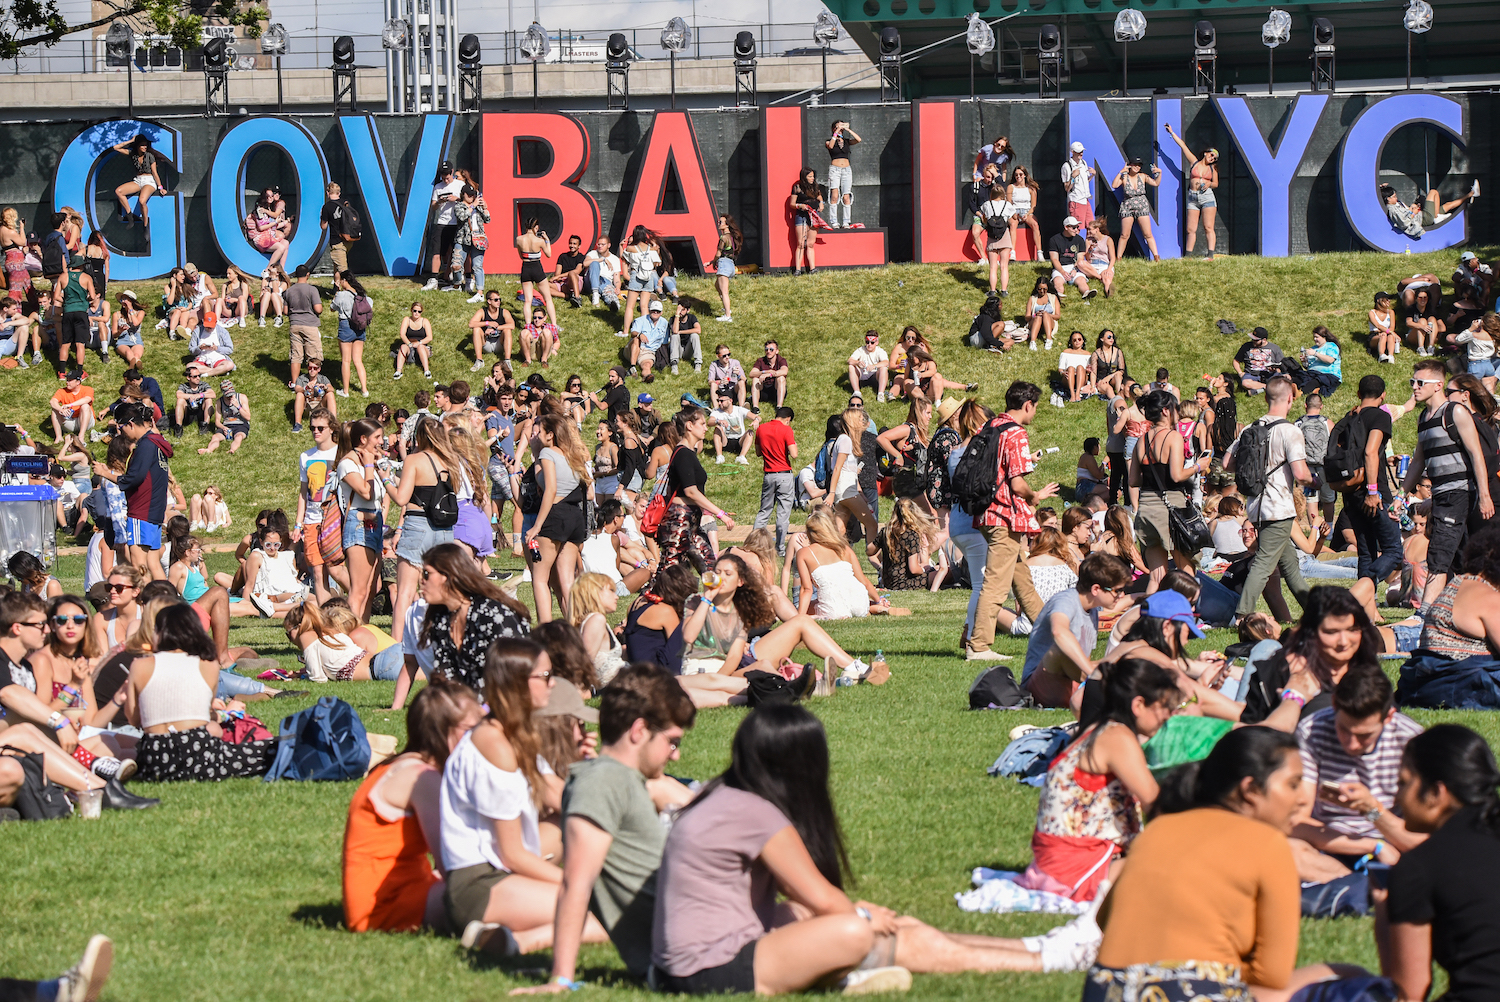 Festivalgoers are seen at 2017 Governors Ball Music Festival